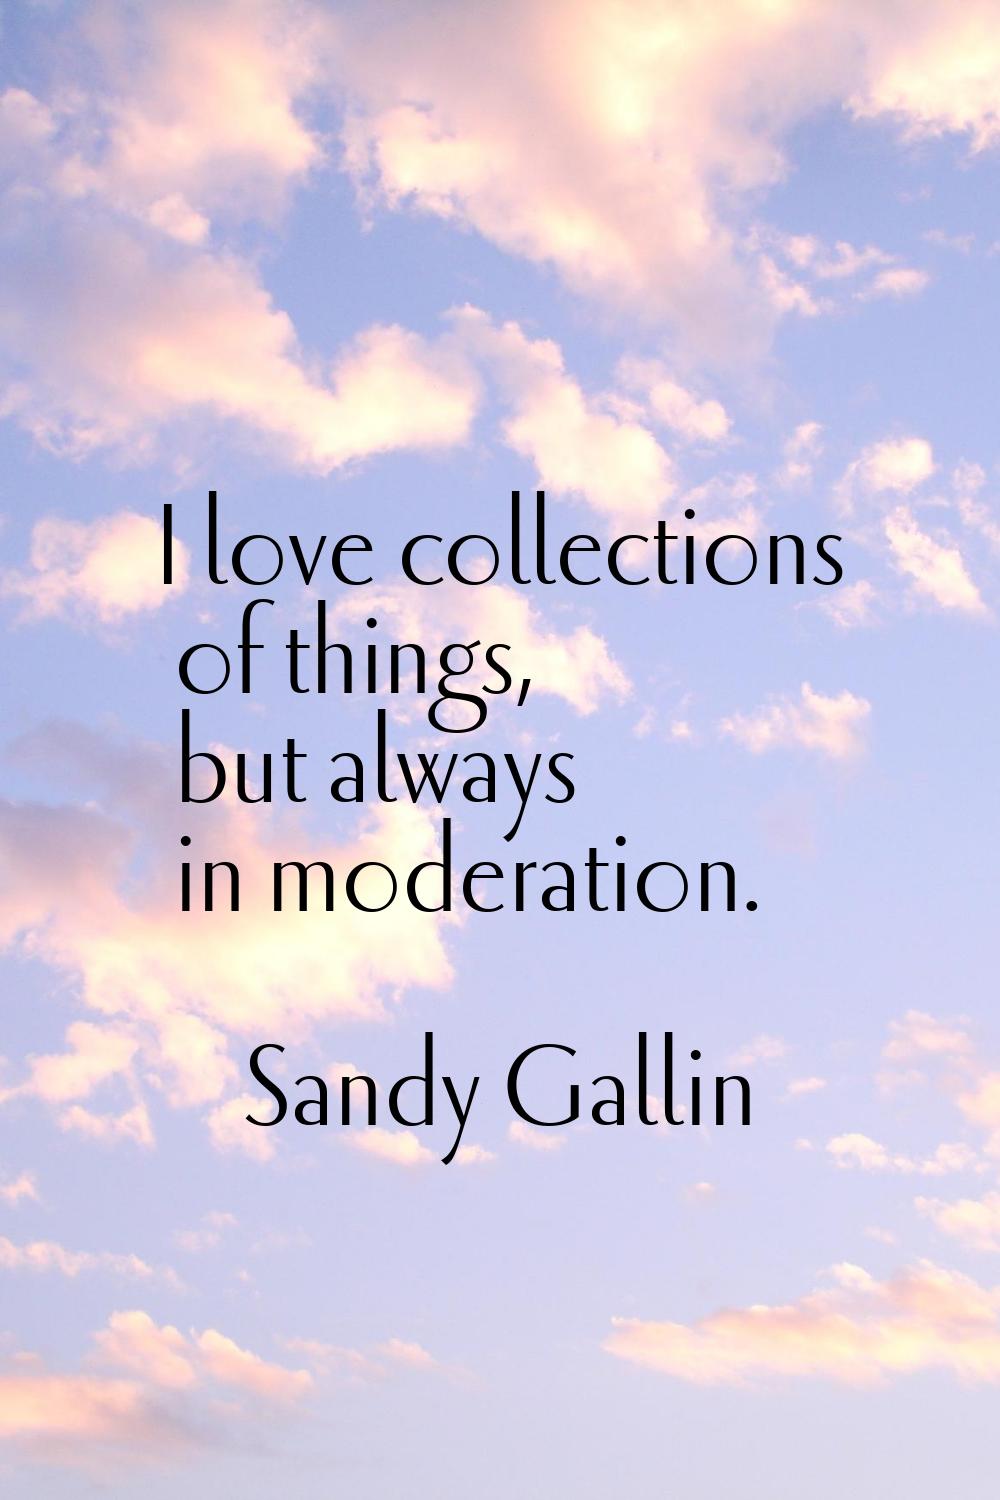 I love collections of things, but always in moderation.